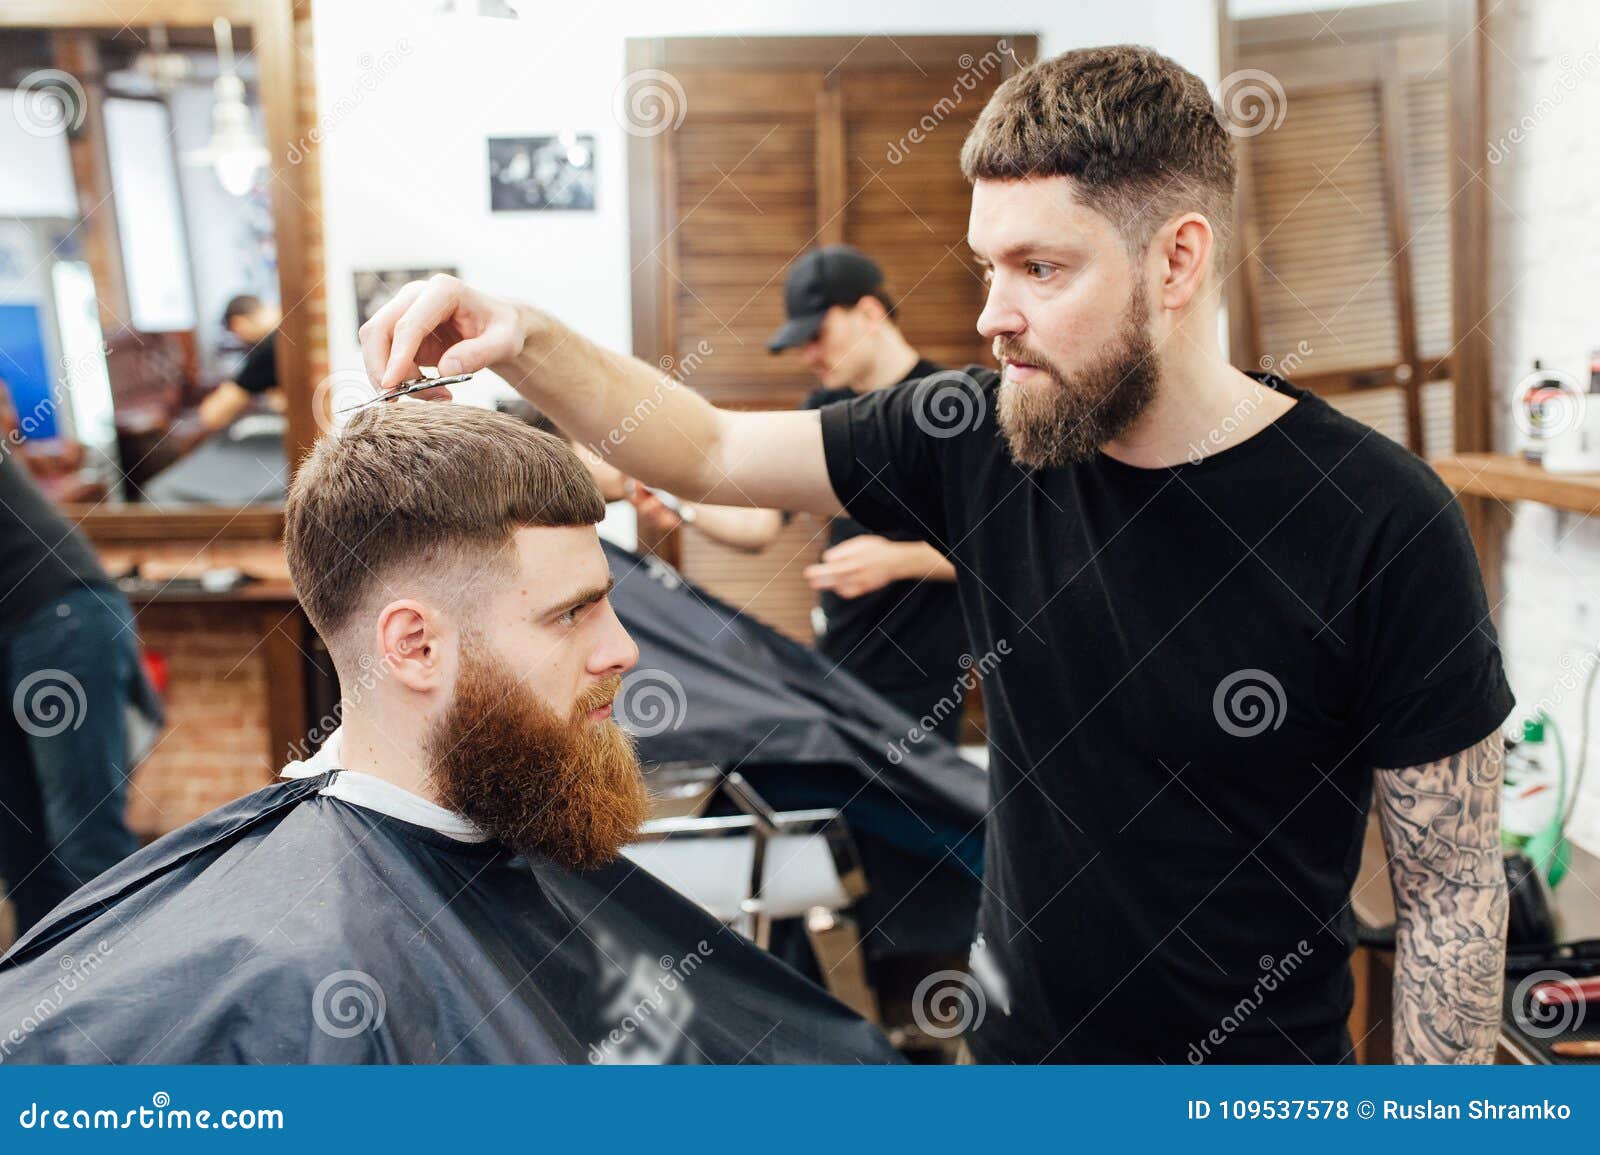 Man Getting Trendy Haircut at Barber Shop. Stock Photo - Image of comb ...